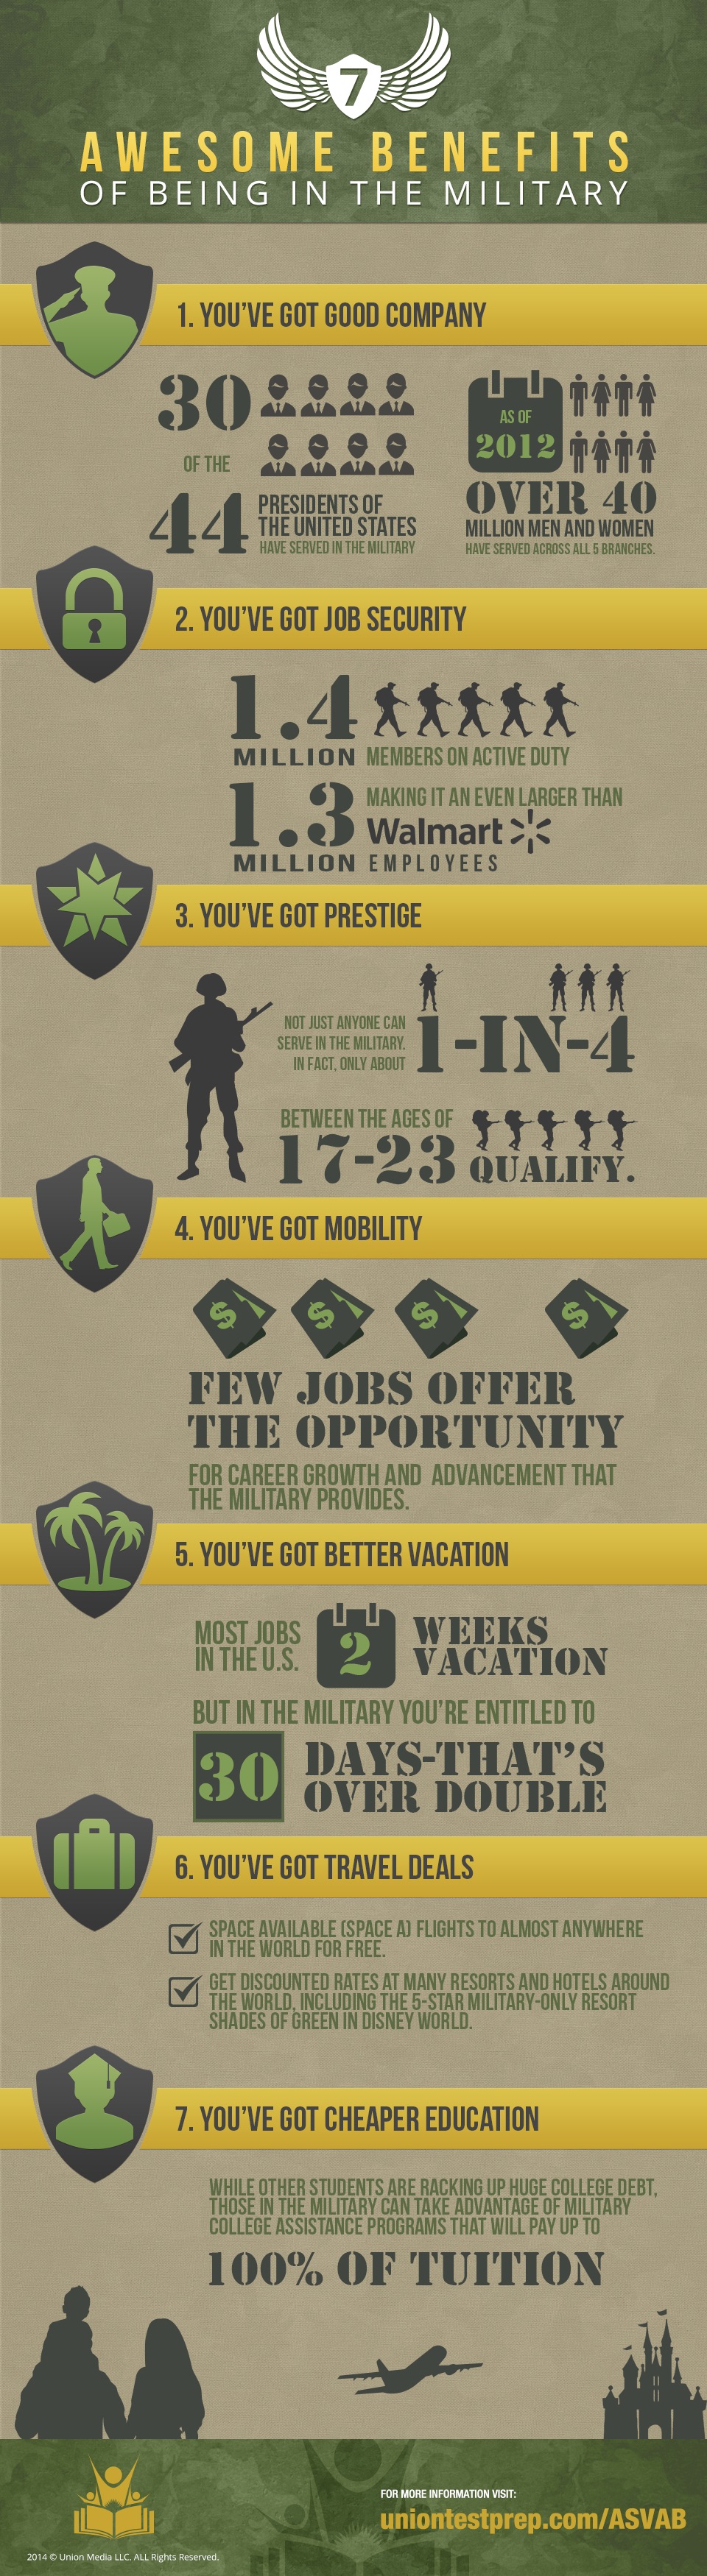 7 benefits of being in the military